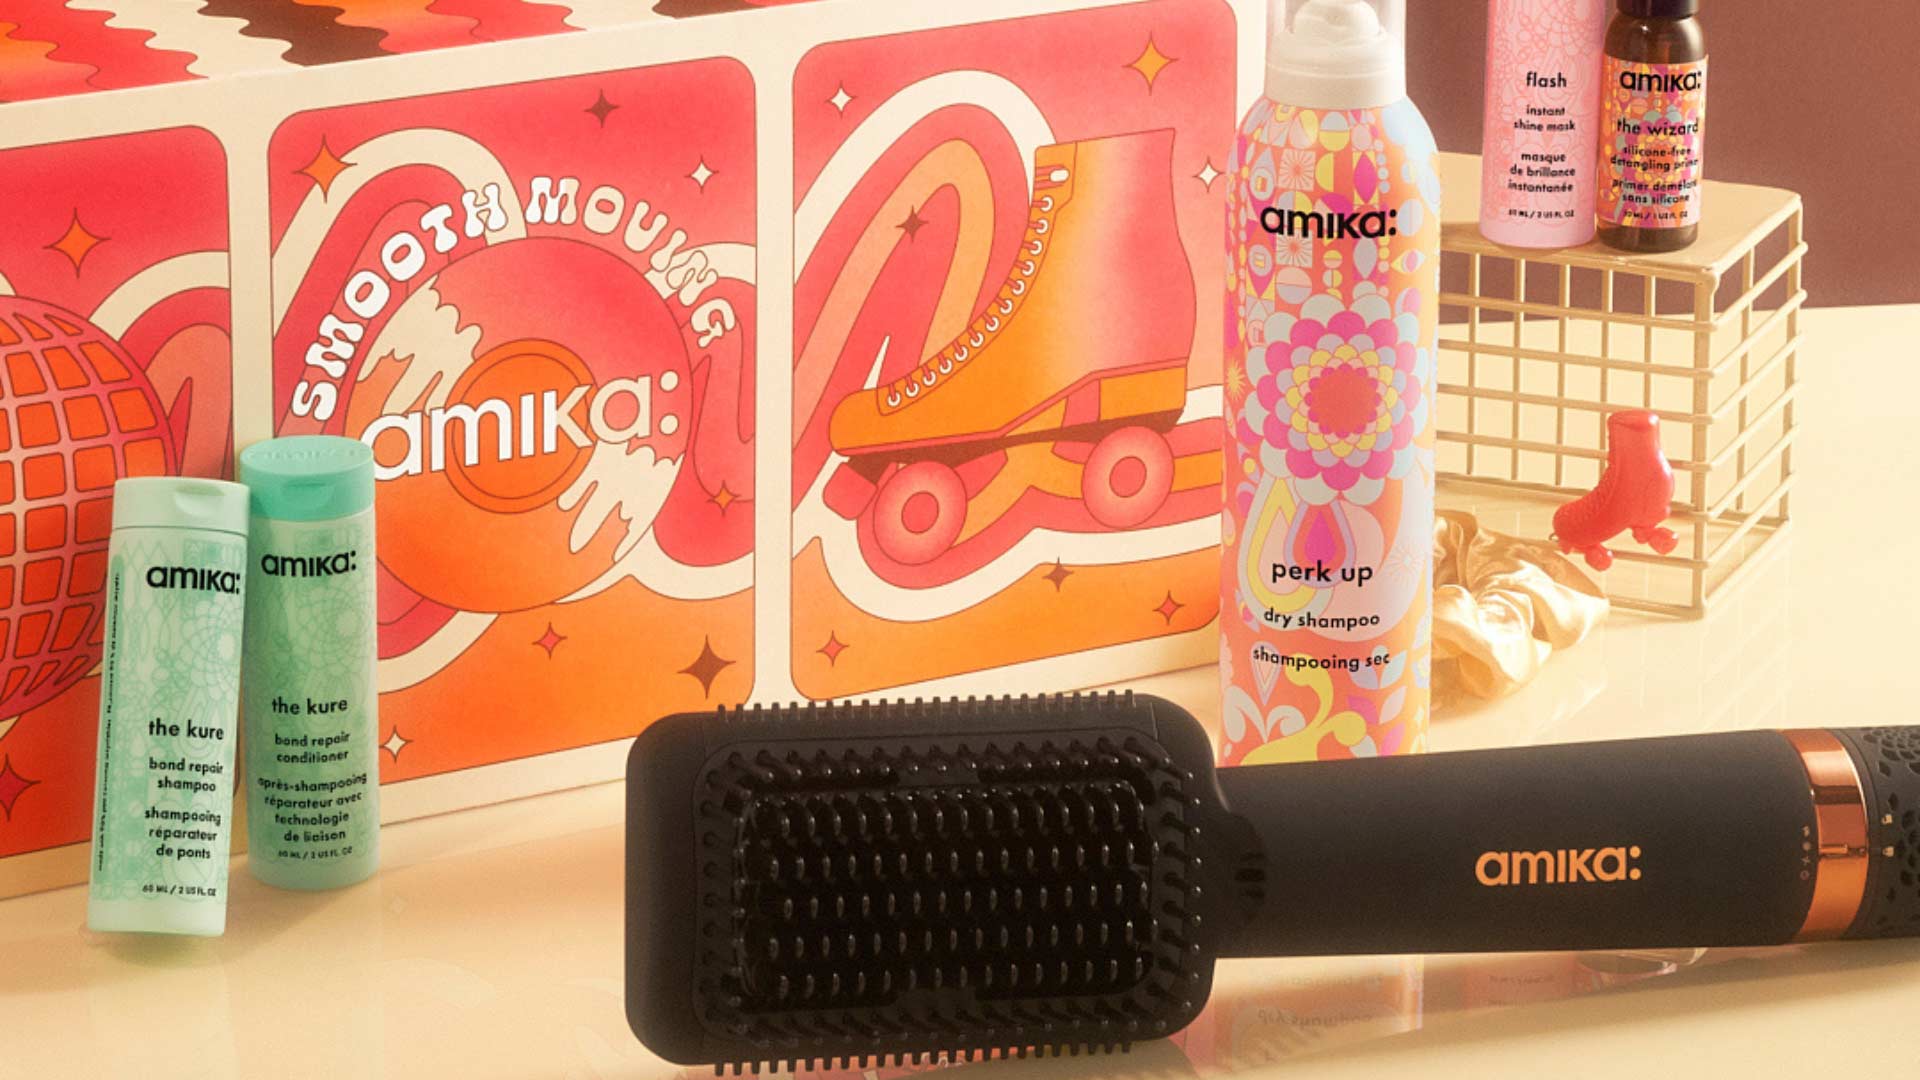 25% OFF WHEN YOU SPEND £35 ON AMIKA!